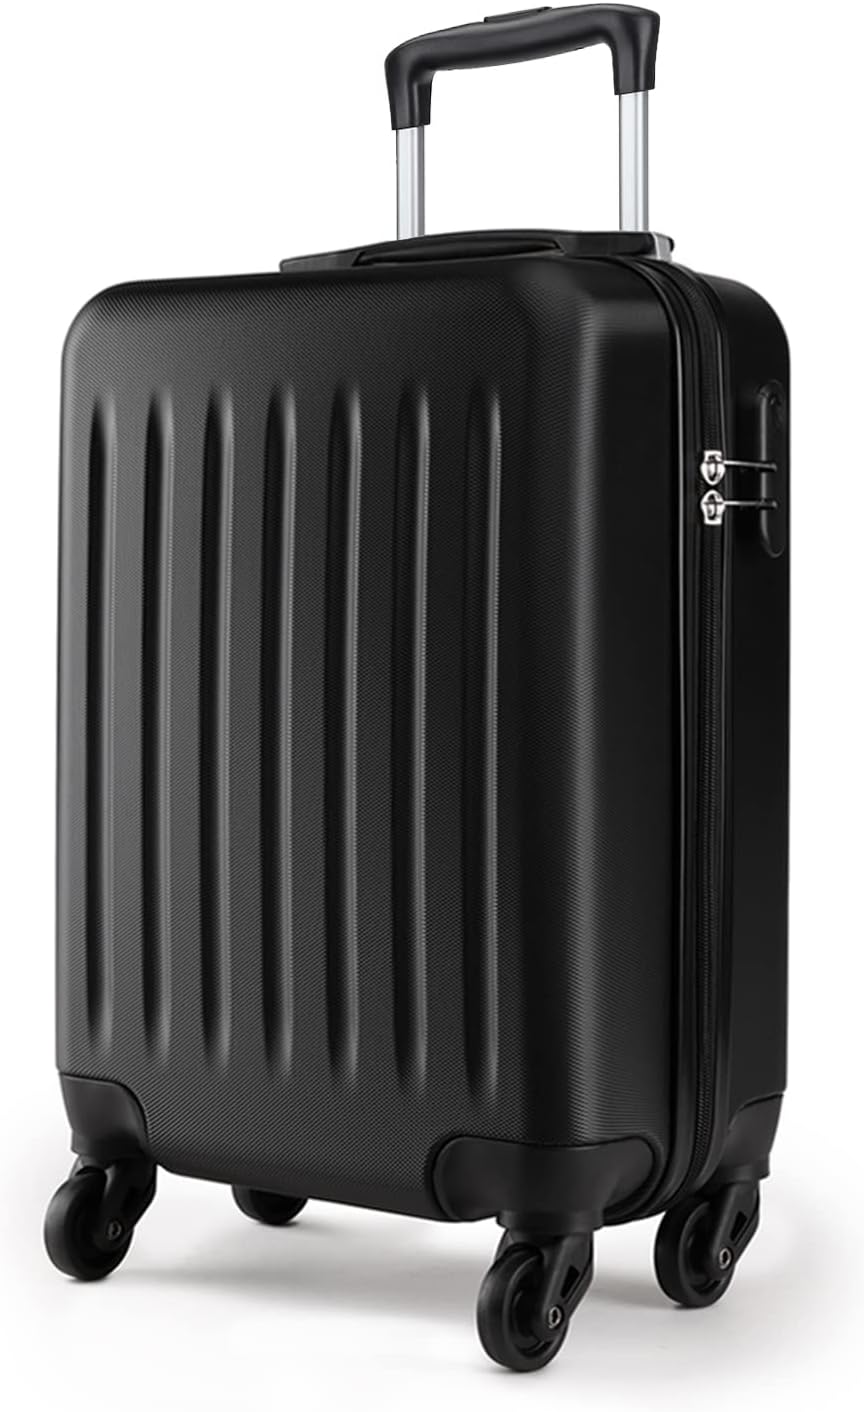 Kono Carry on Suitcase 19 Inch Hardside Carry on Luggage Small Suitcase with Spinner Wheels Lightweight Rolling Cabin Suitcase for Airplanes Travel(Black) 